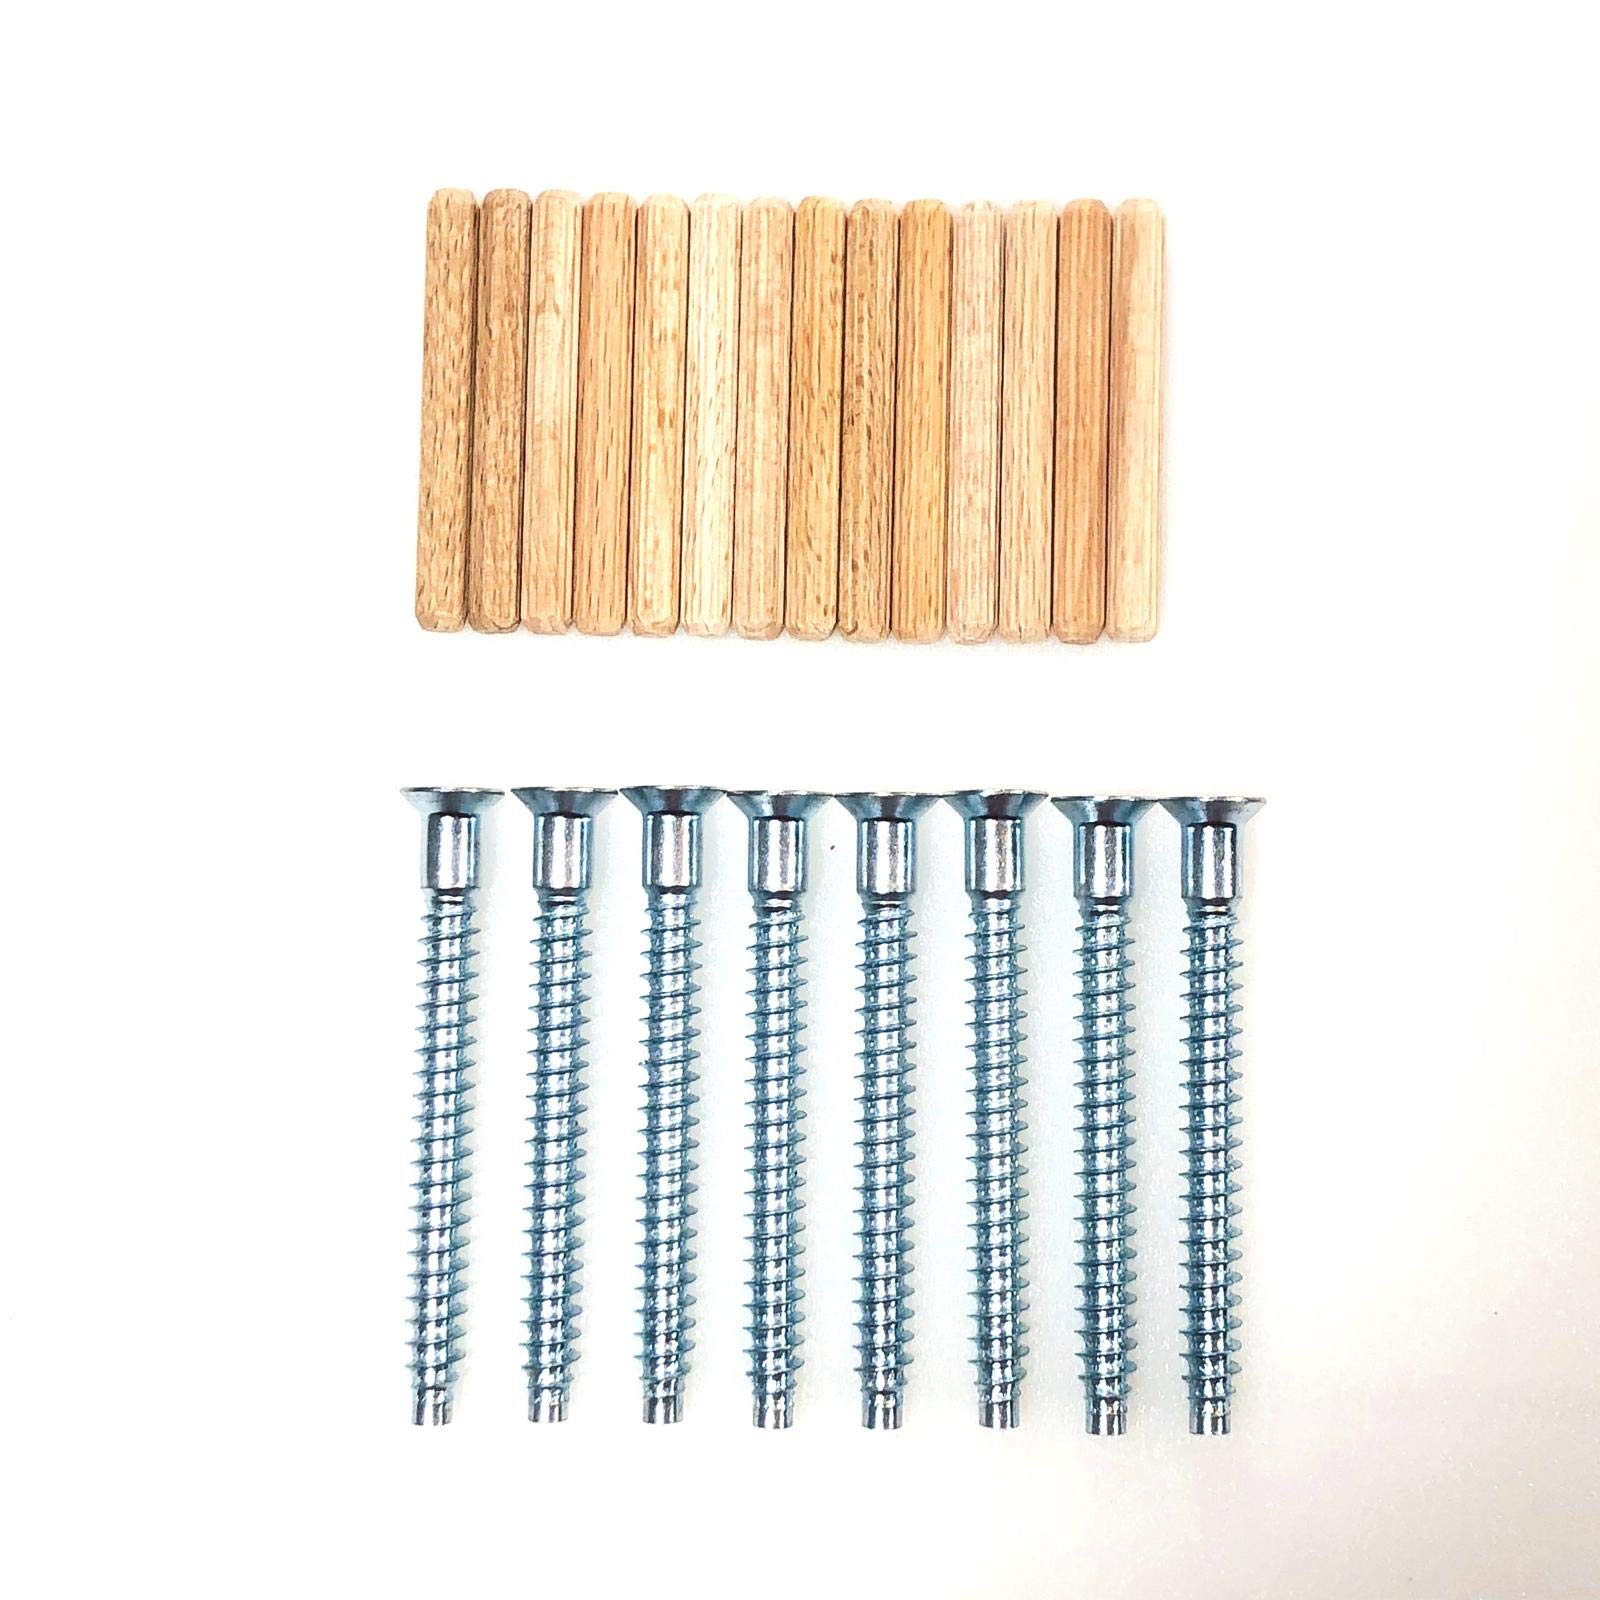 ReplacementScrews Hardware Kit Compatible with IKEA KALLAX 2 x 2 Shelf Unit 602.758.12 - All Screws (104321) and Dowels (101339)